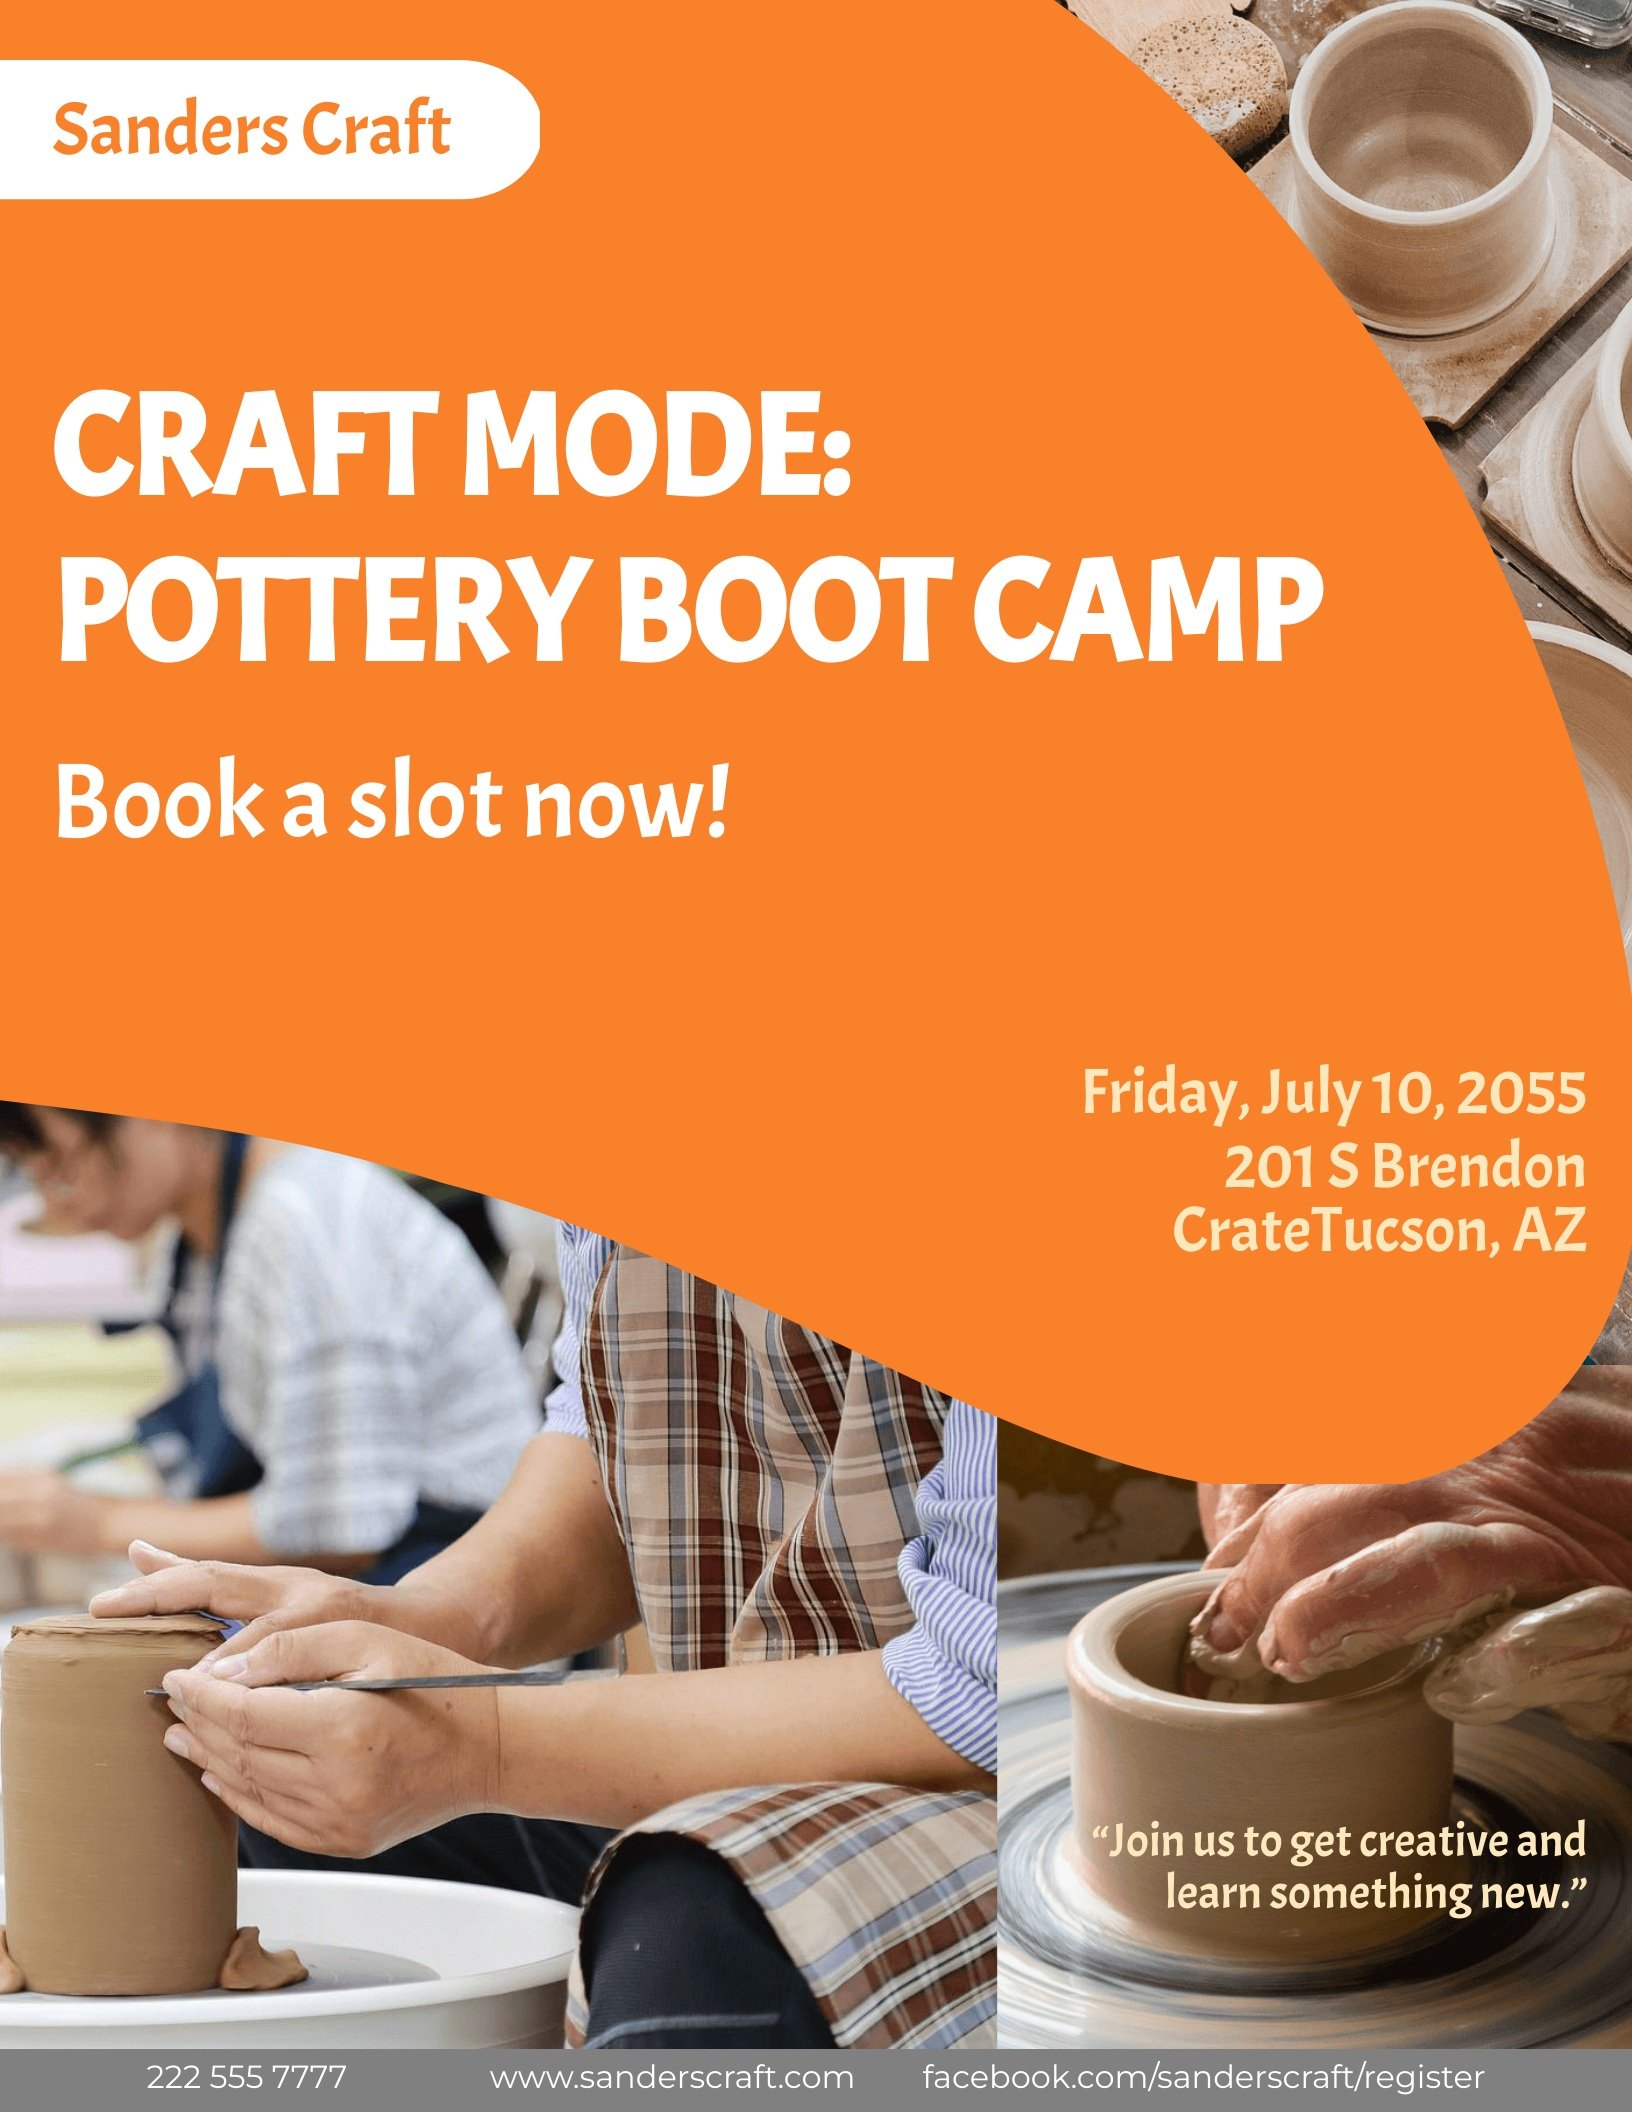 Free Pottery Bootcamp Flyer in Word, Google Docs, Illustrator, PSD, Apple Pages, Publisher